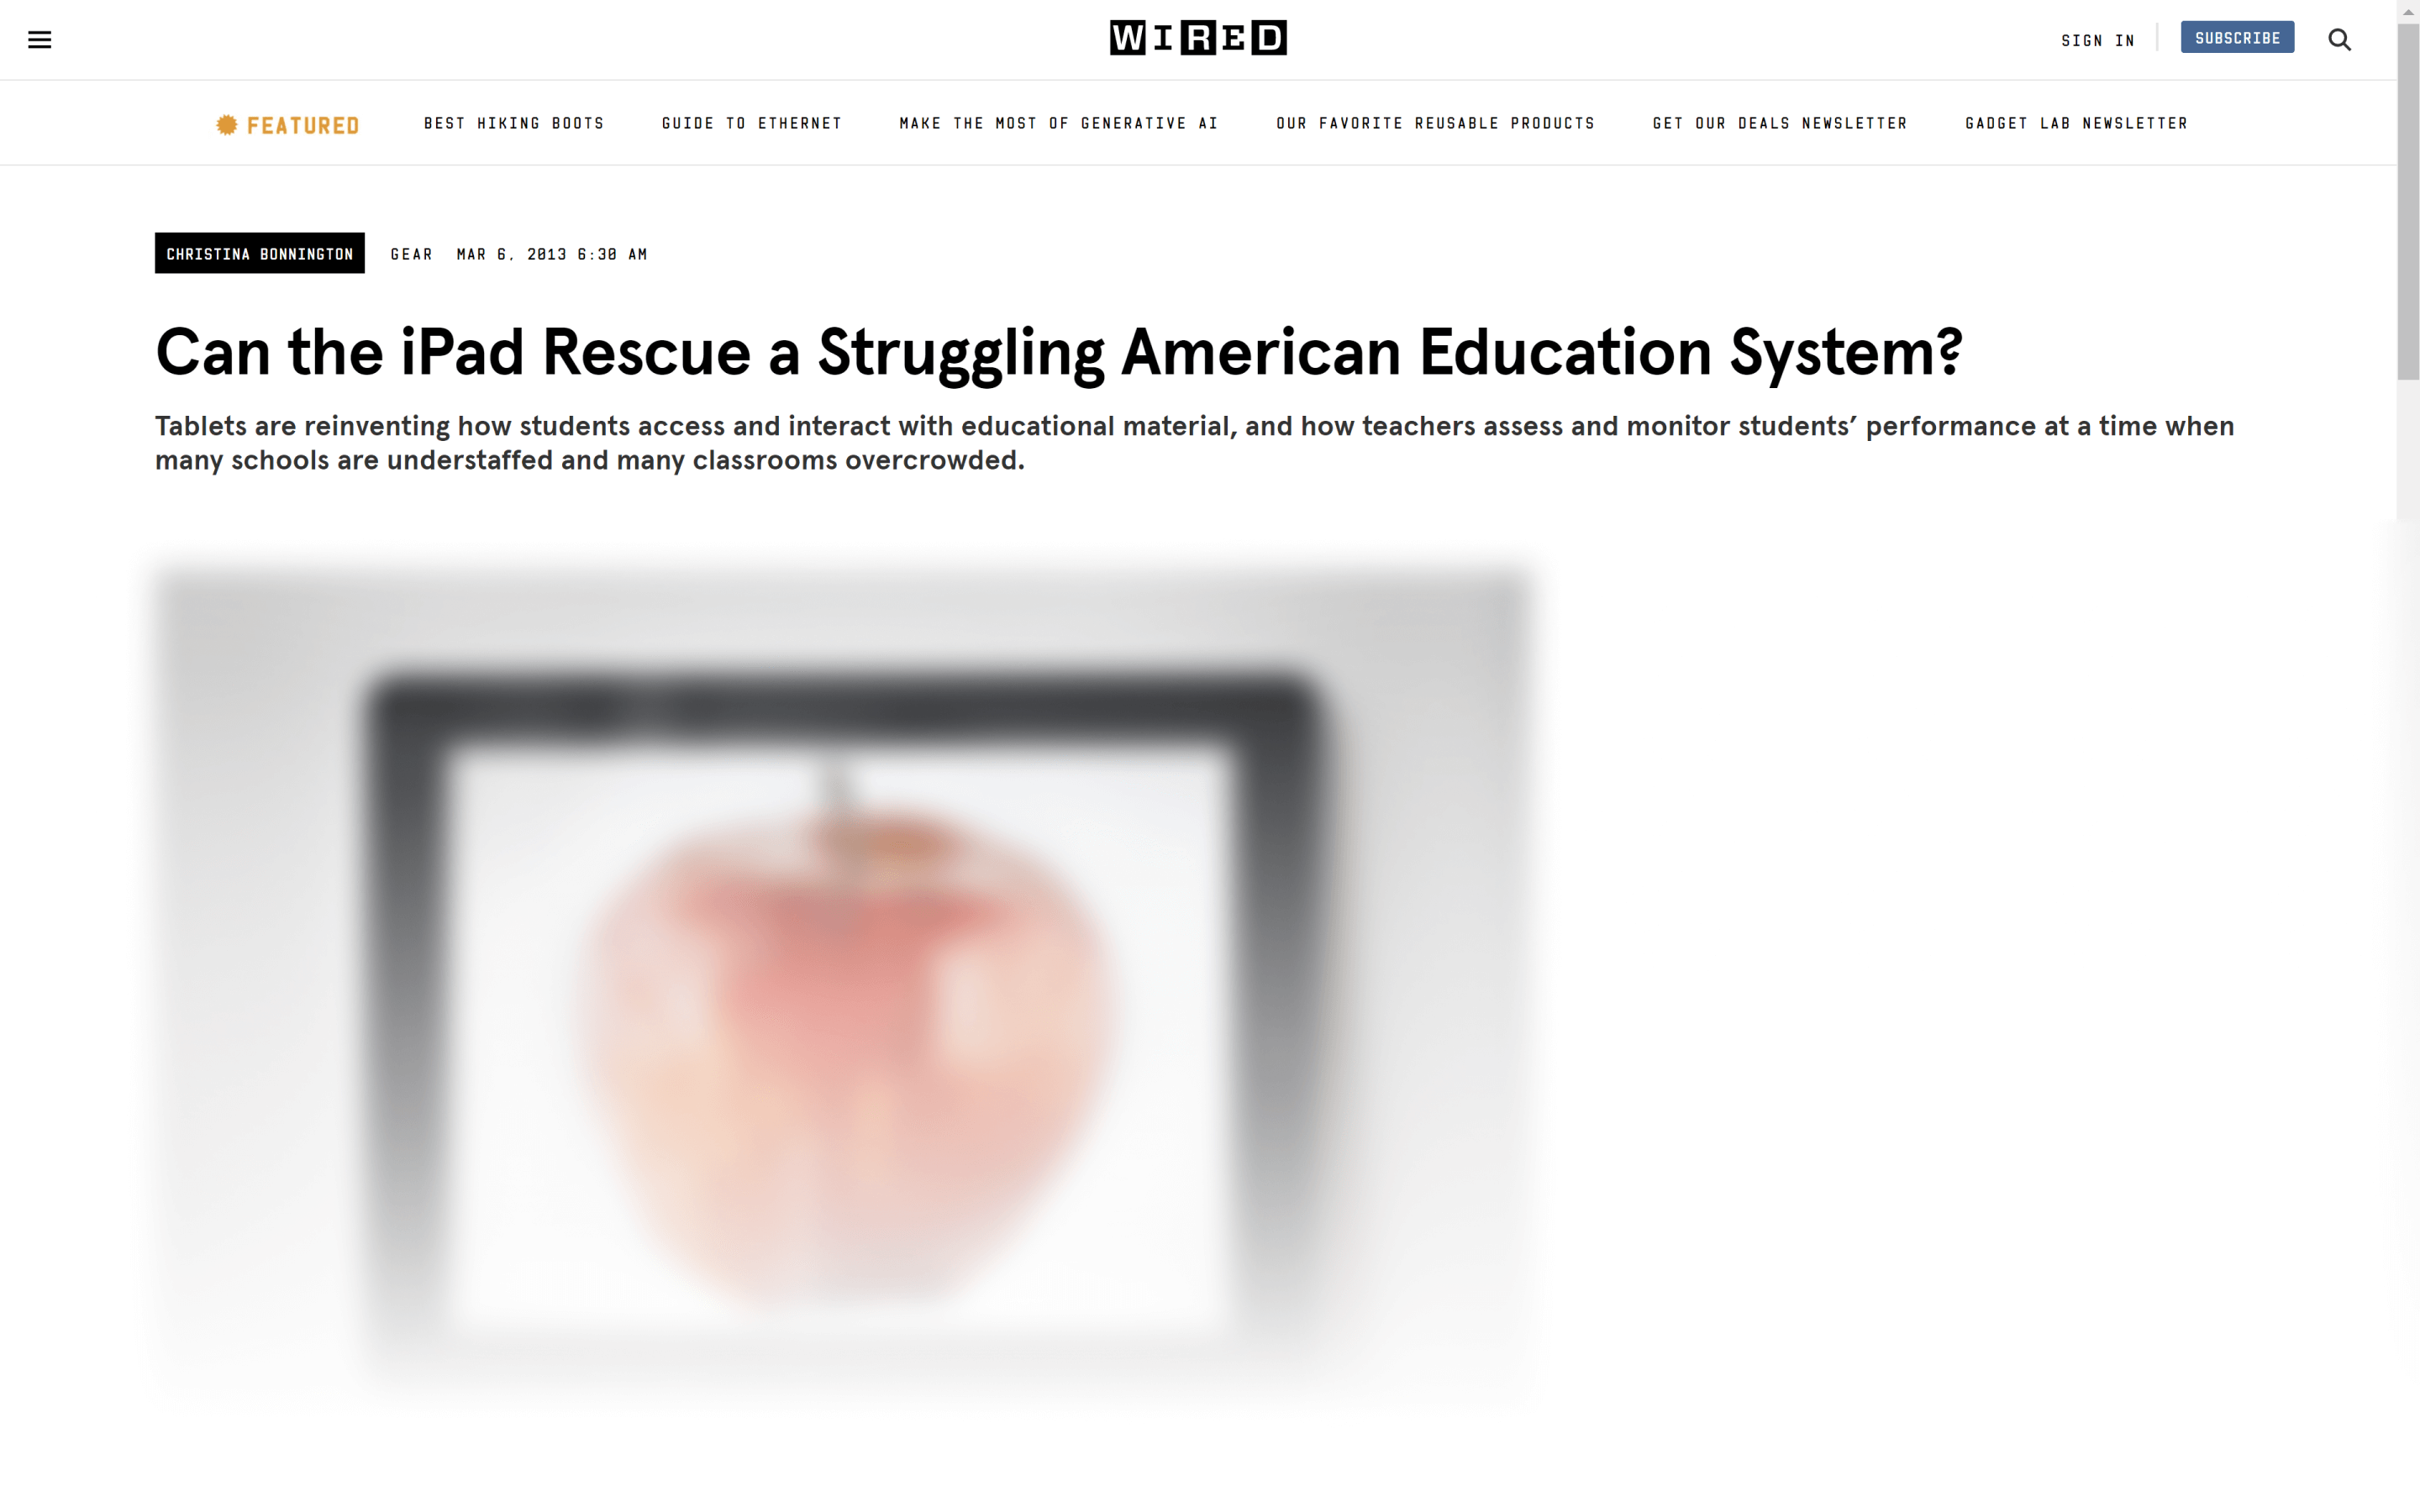 Can the ipad rescue a struggling american education system?